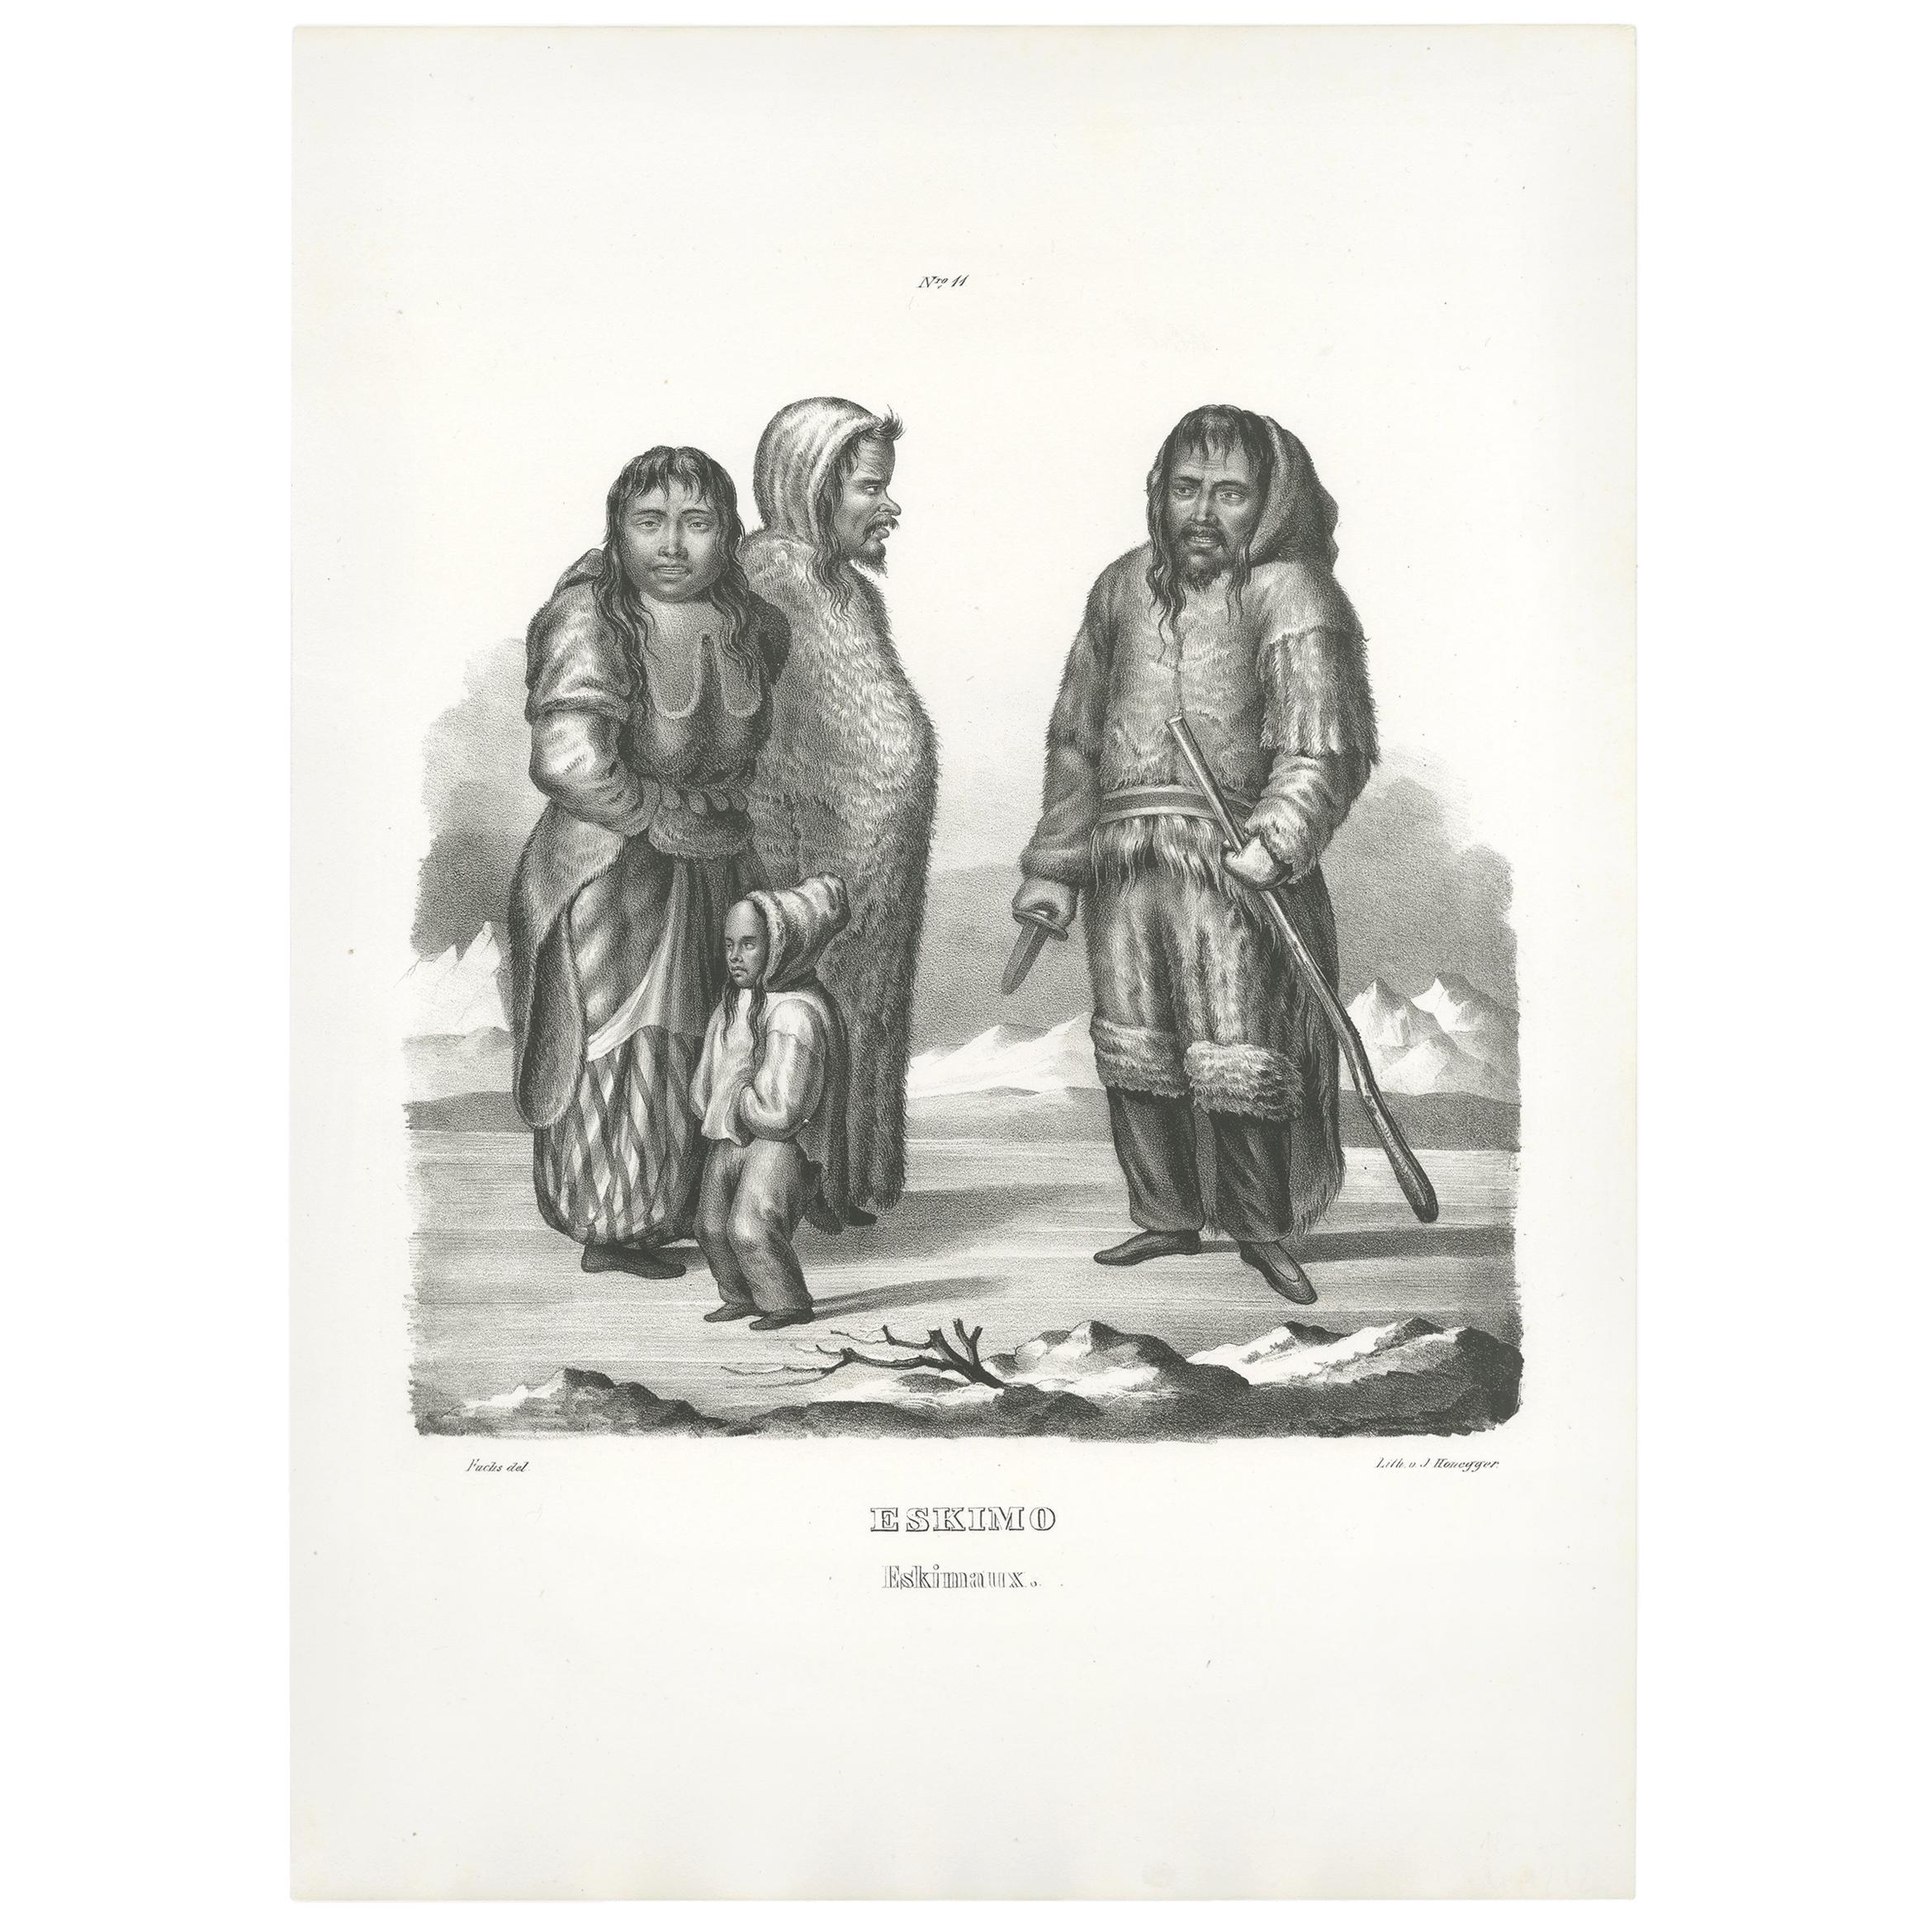 Antique Print of an Inuit Family by Honegger, 1845